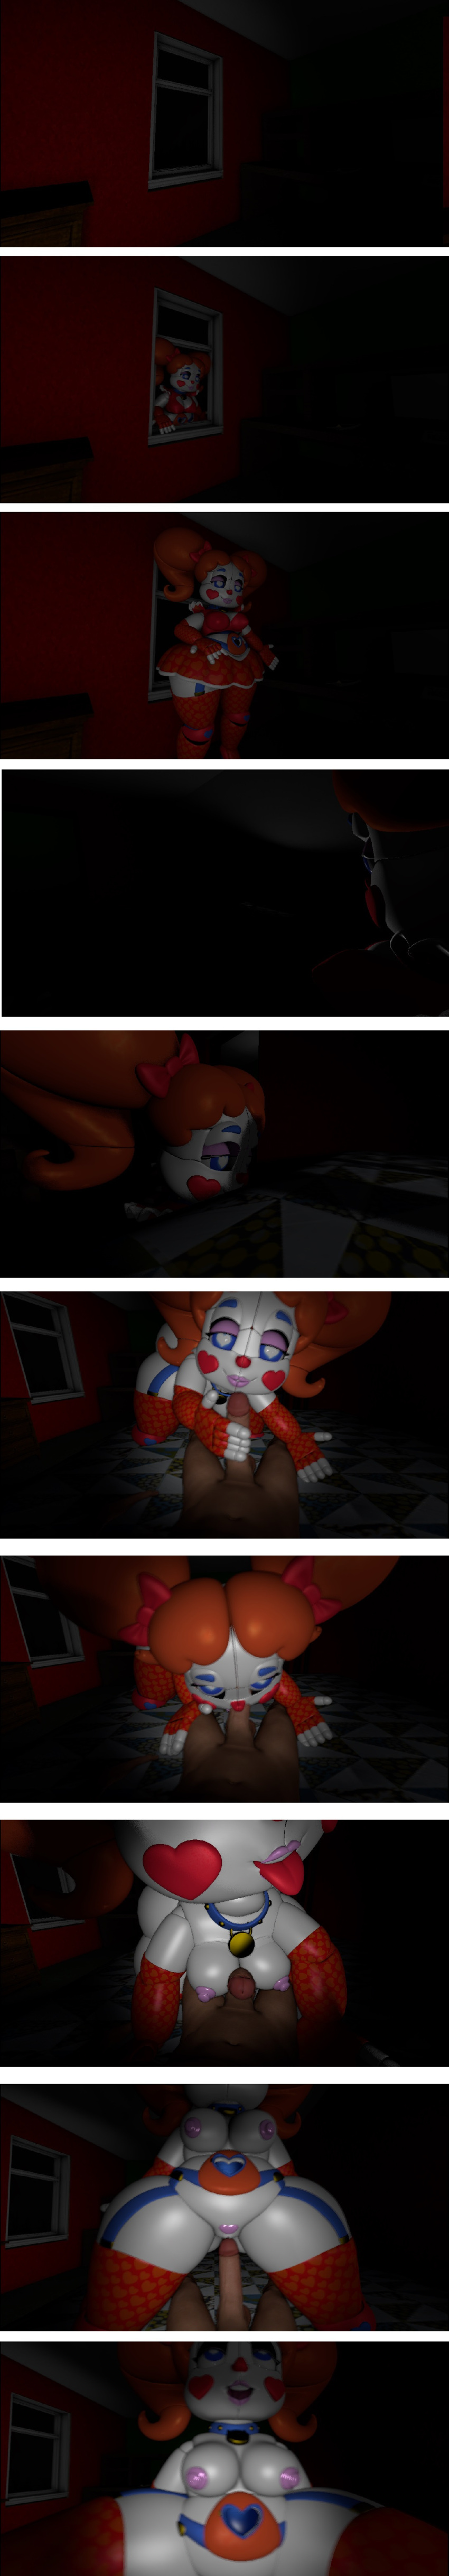 1boy 1boy1girl 1girl bedroom circus_baby comic five_nights_at_freddy's nude penis sex sexbot_circus_baby sister_location sneaking window